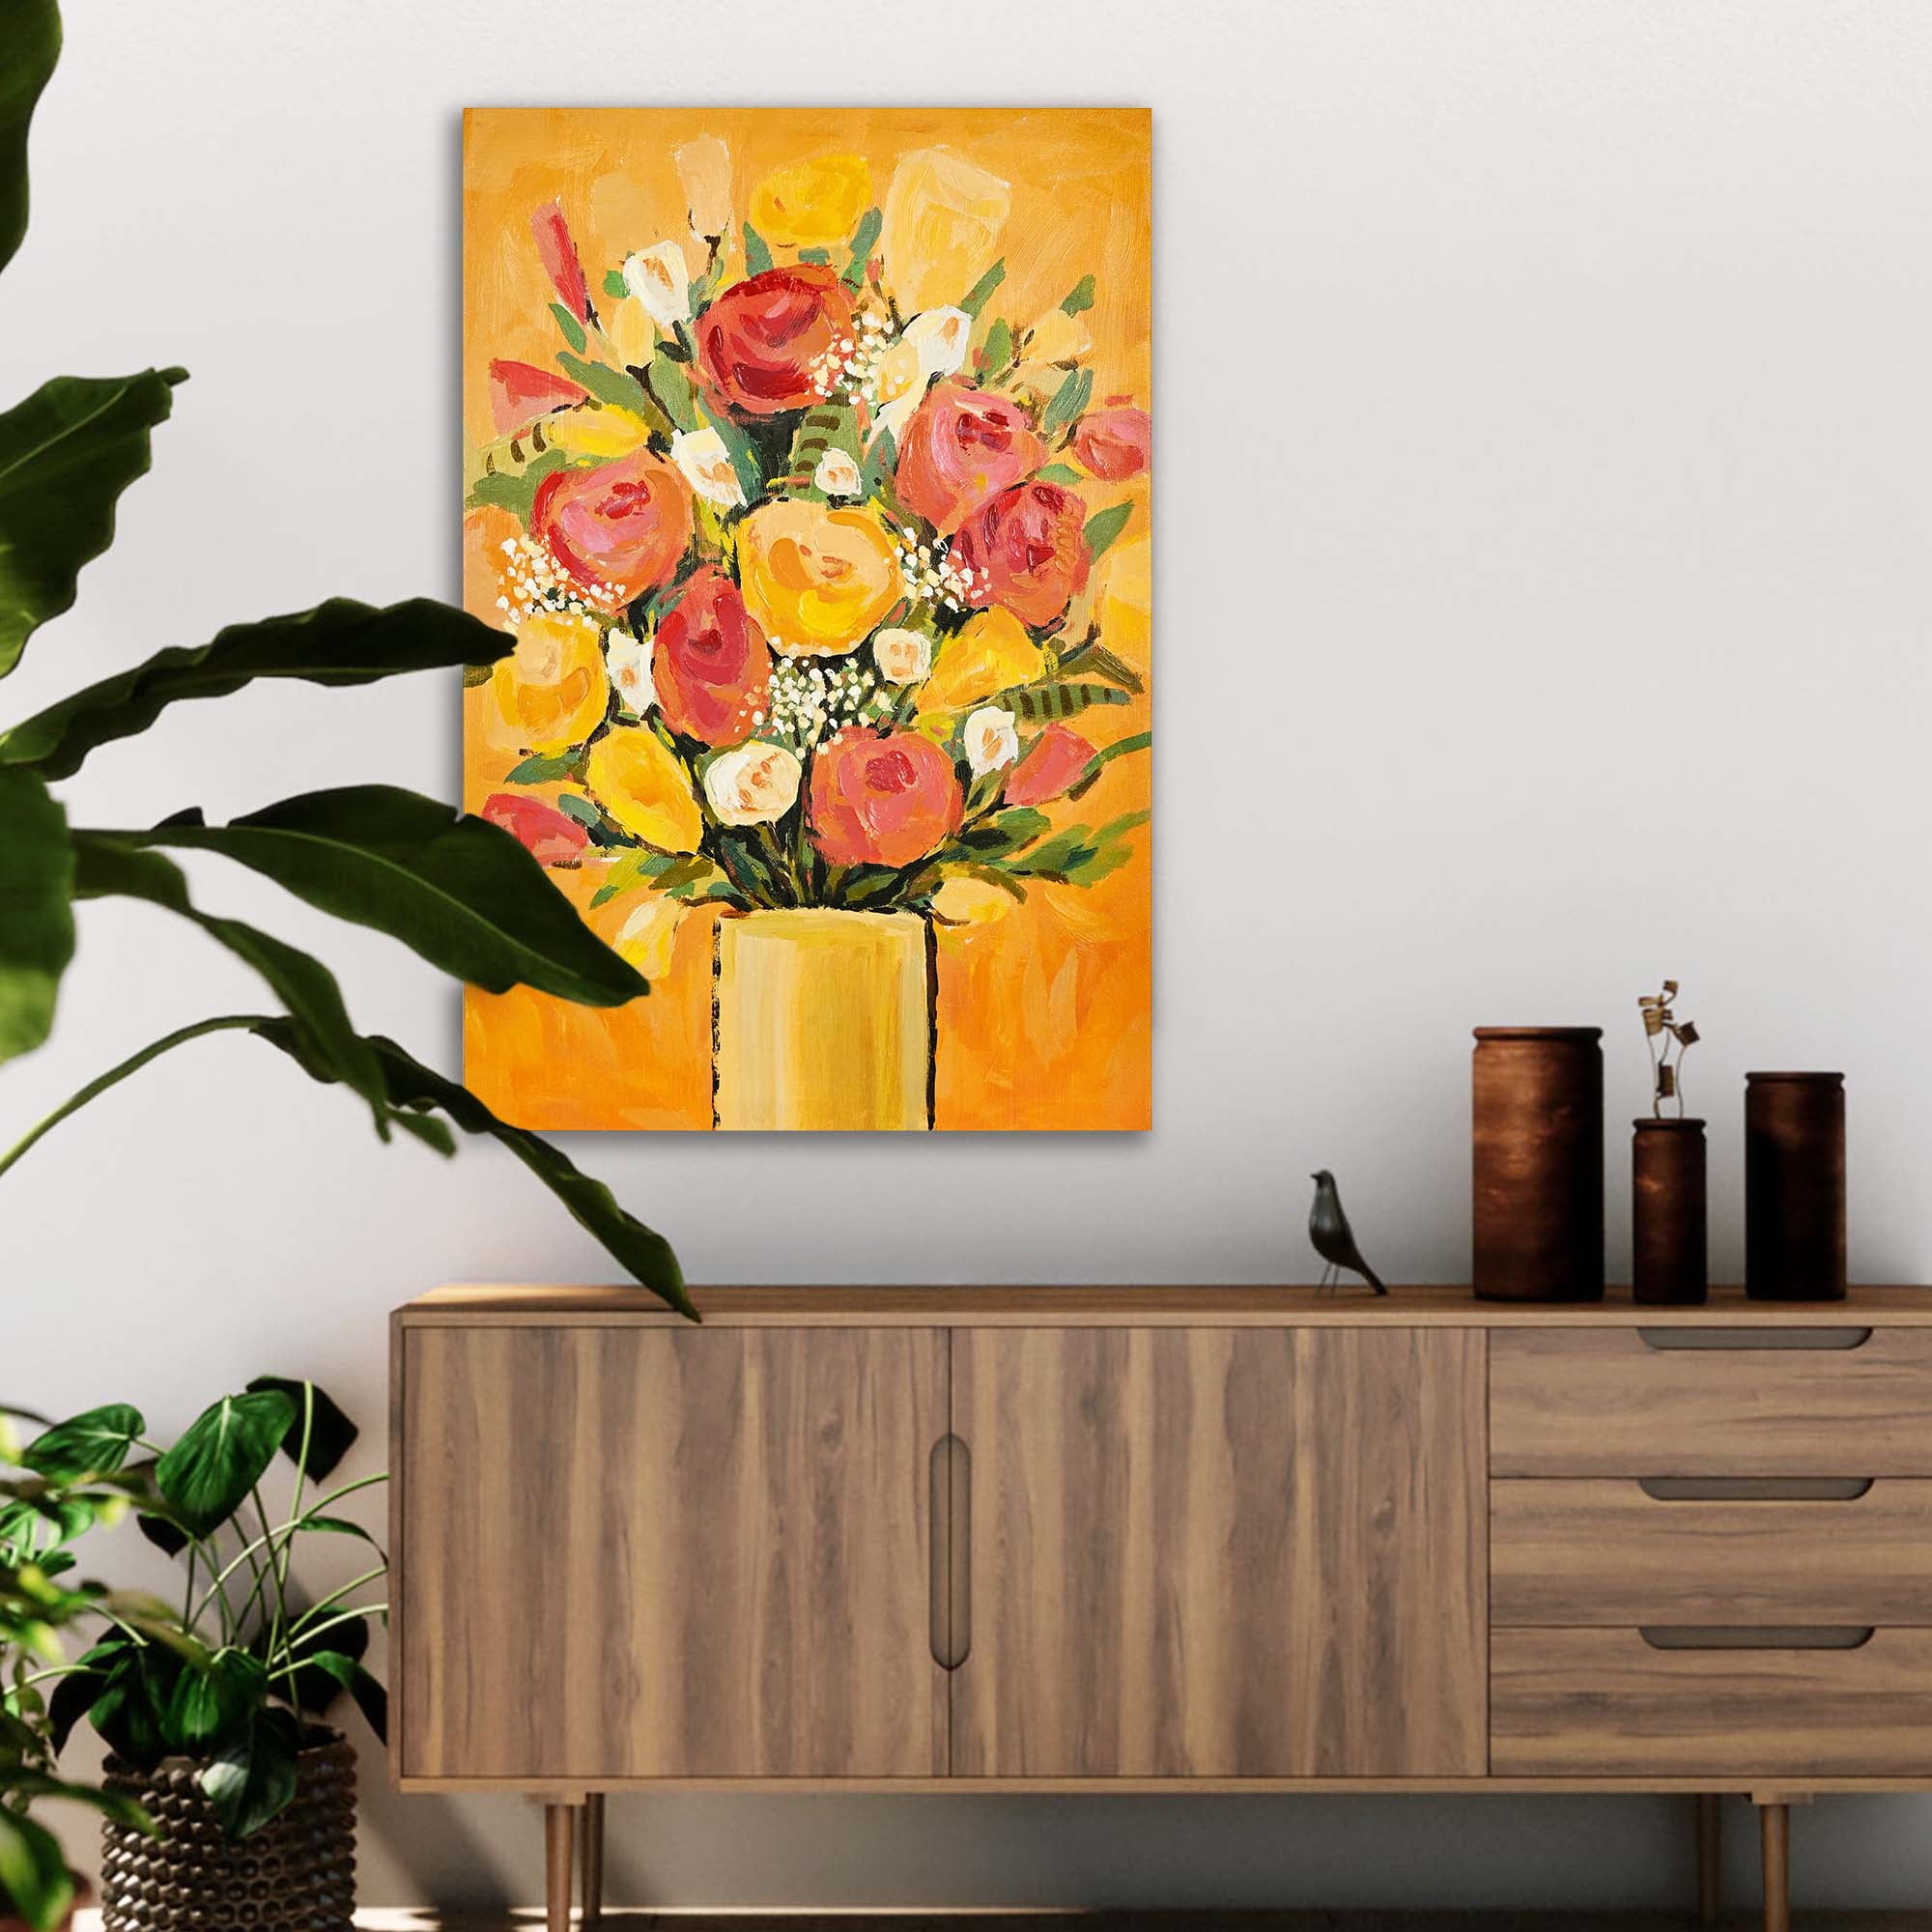 ArtbyHannah 24x48 inch Colorful Flower Large Canvas Painting Wall Art, Hand  Painted Oil Painting 3D Textured Wall Decor for Living Room, Ready to Hang  